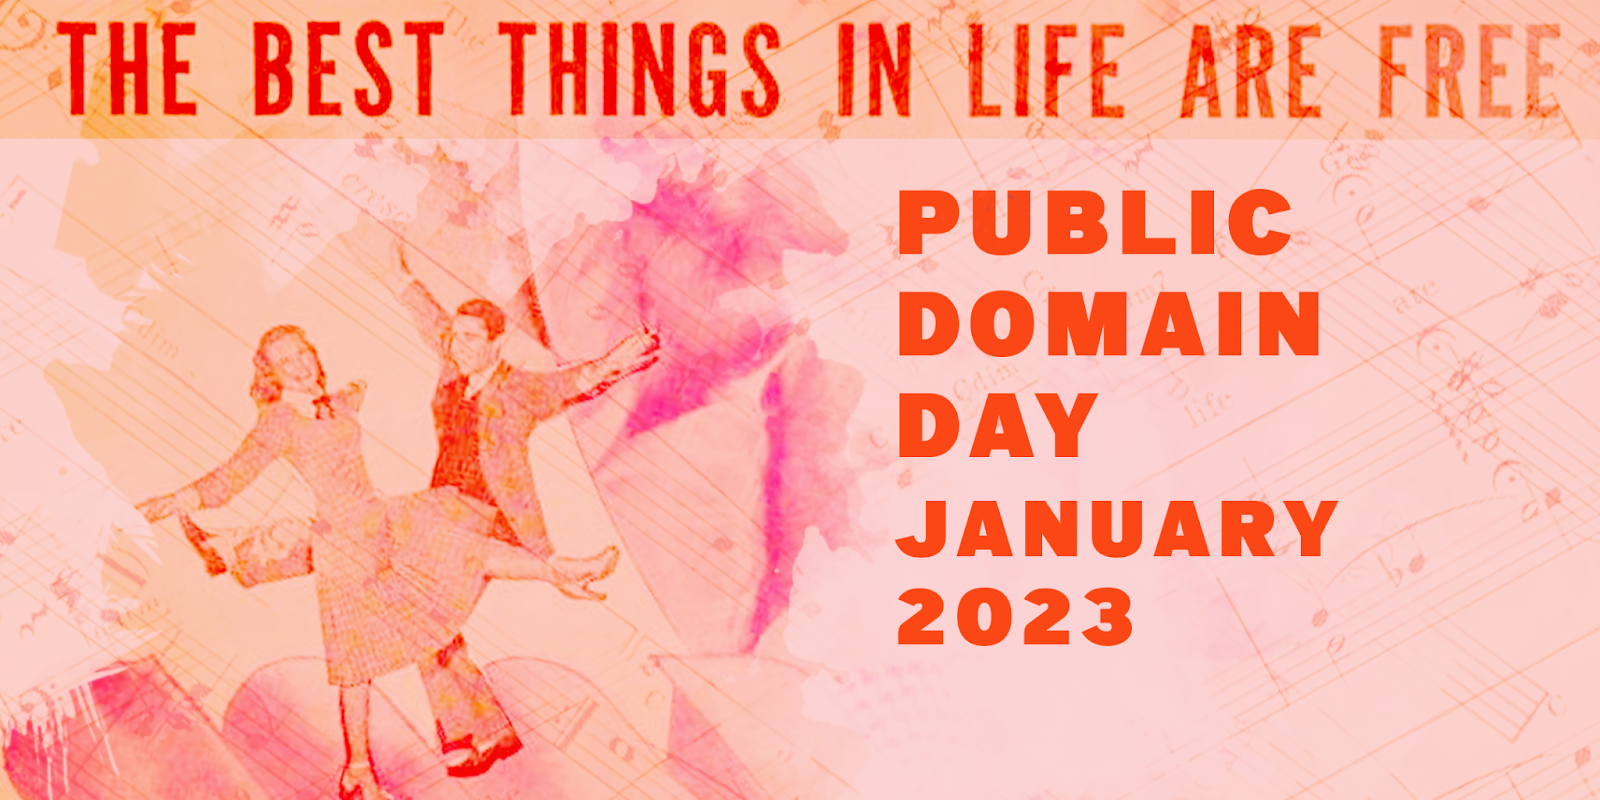 Celebrate Public Domain Day 2023 with Us The Best Things in Life Are